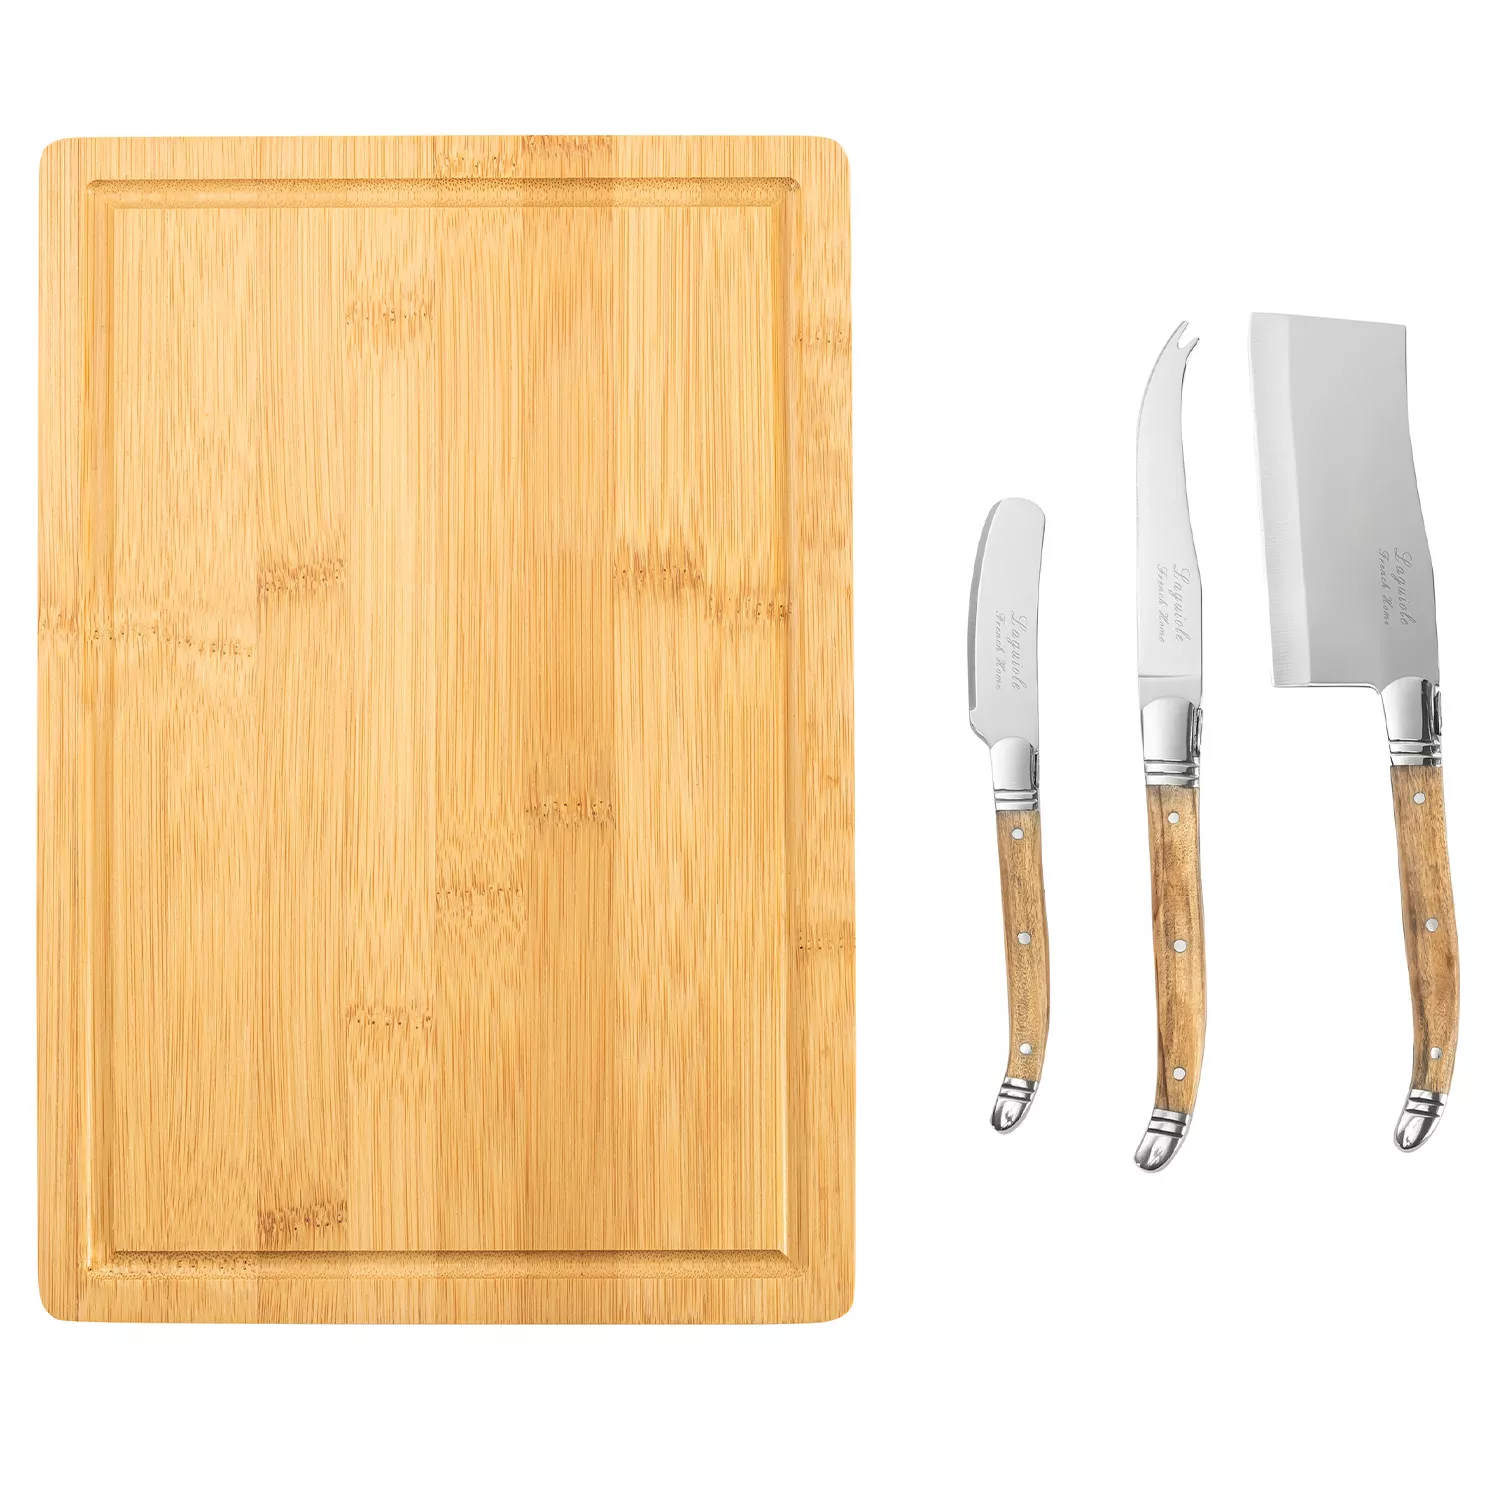 French Home Connoisseur Olive Wood Cheese Knives and Bamboo Cheese Board